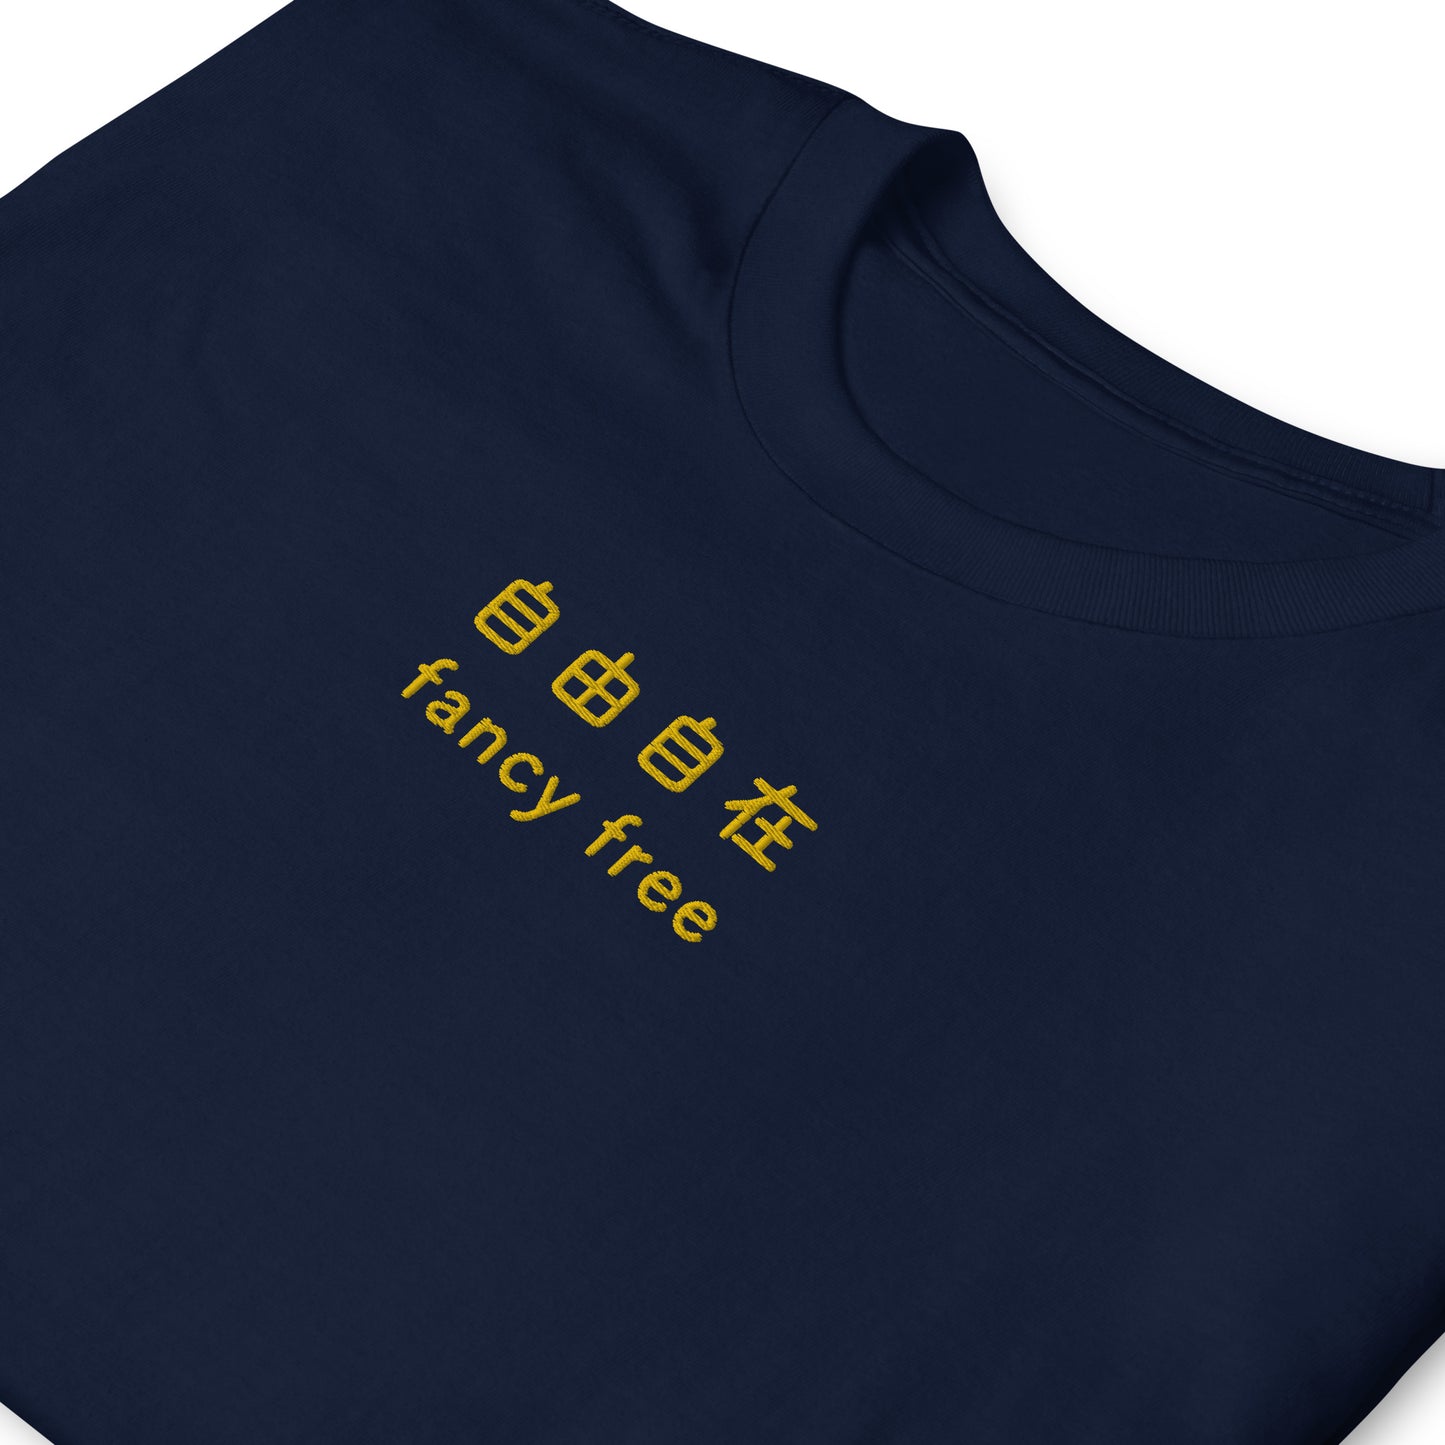 Navy High Quality Tee - Front Design with an Yellow Embroidery "Fancy Free" in Japanese,Chinese and English